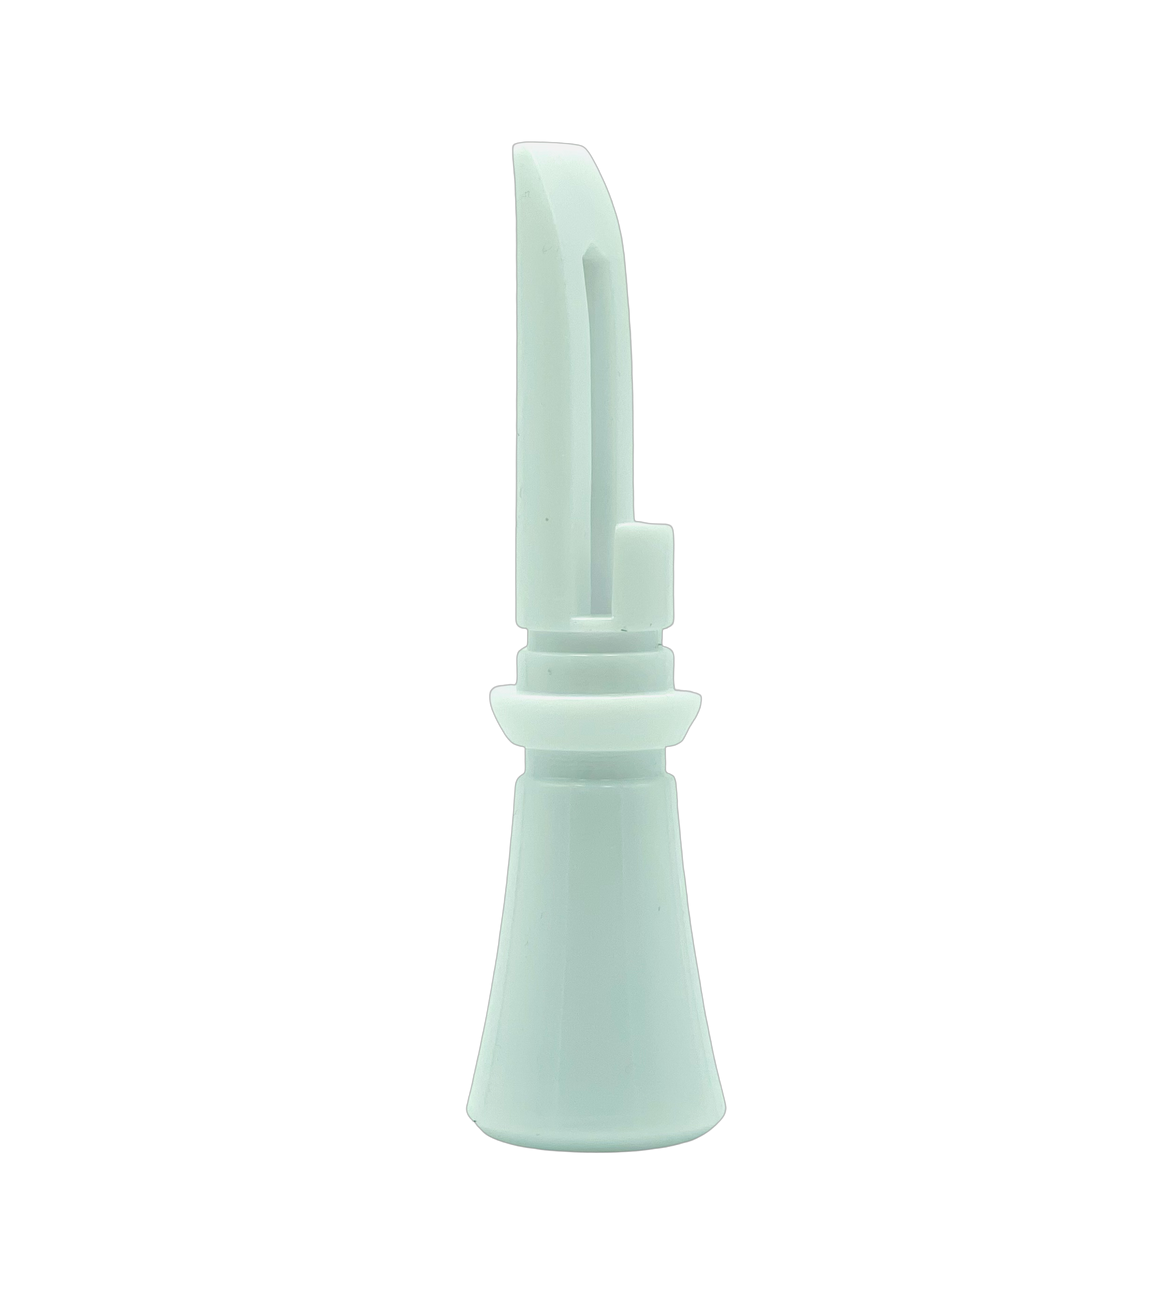 SOLID WHITE POLYCARBONATE DUCK CALL INSERT